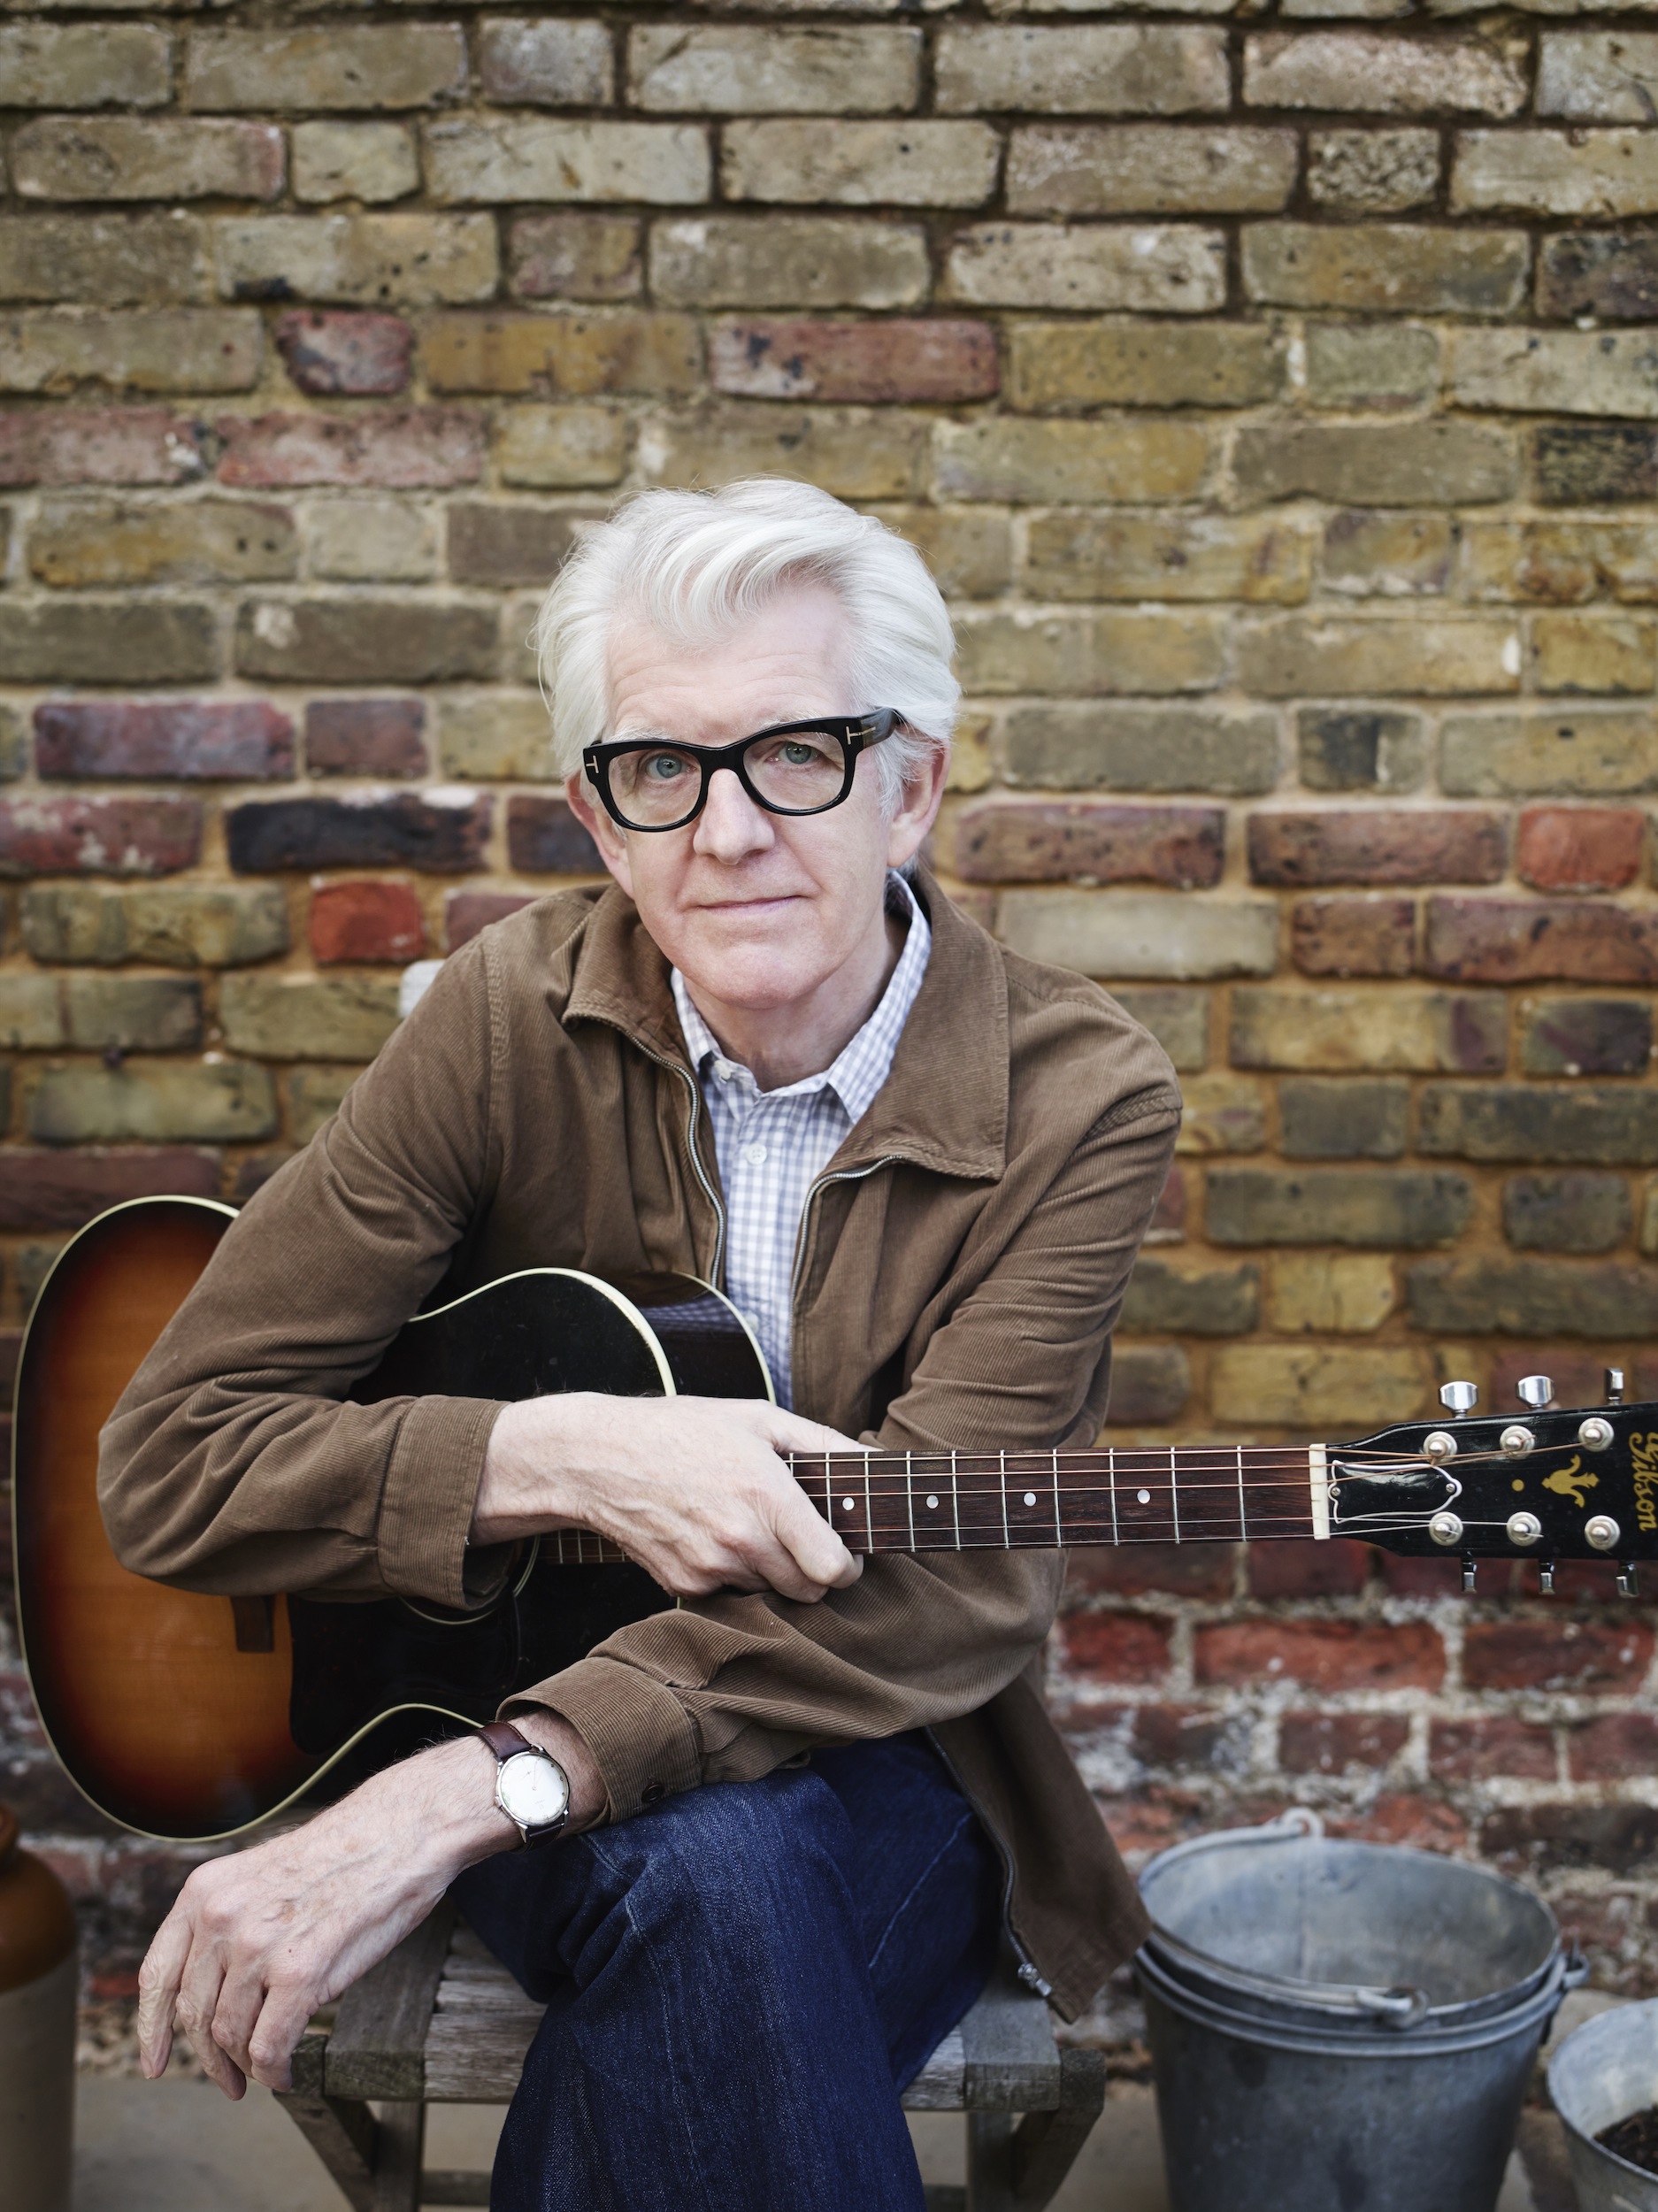 Exclusive: Nick Lowe, “Without Love” (Live From Yep Roc 15)